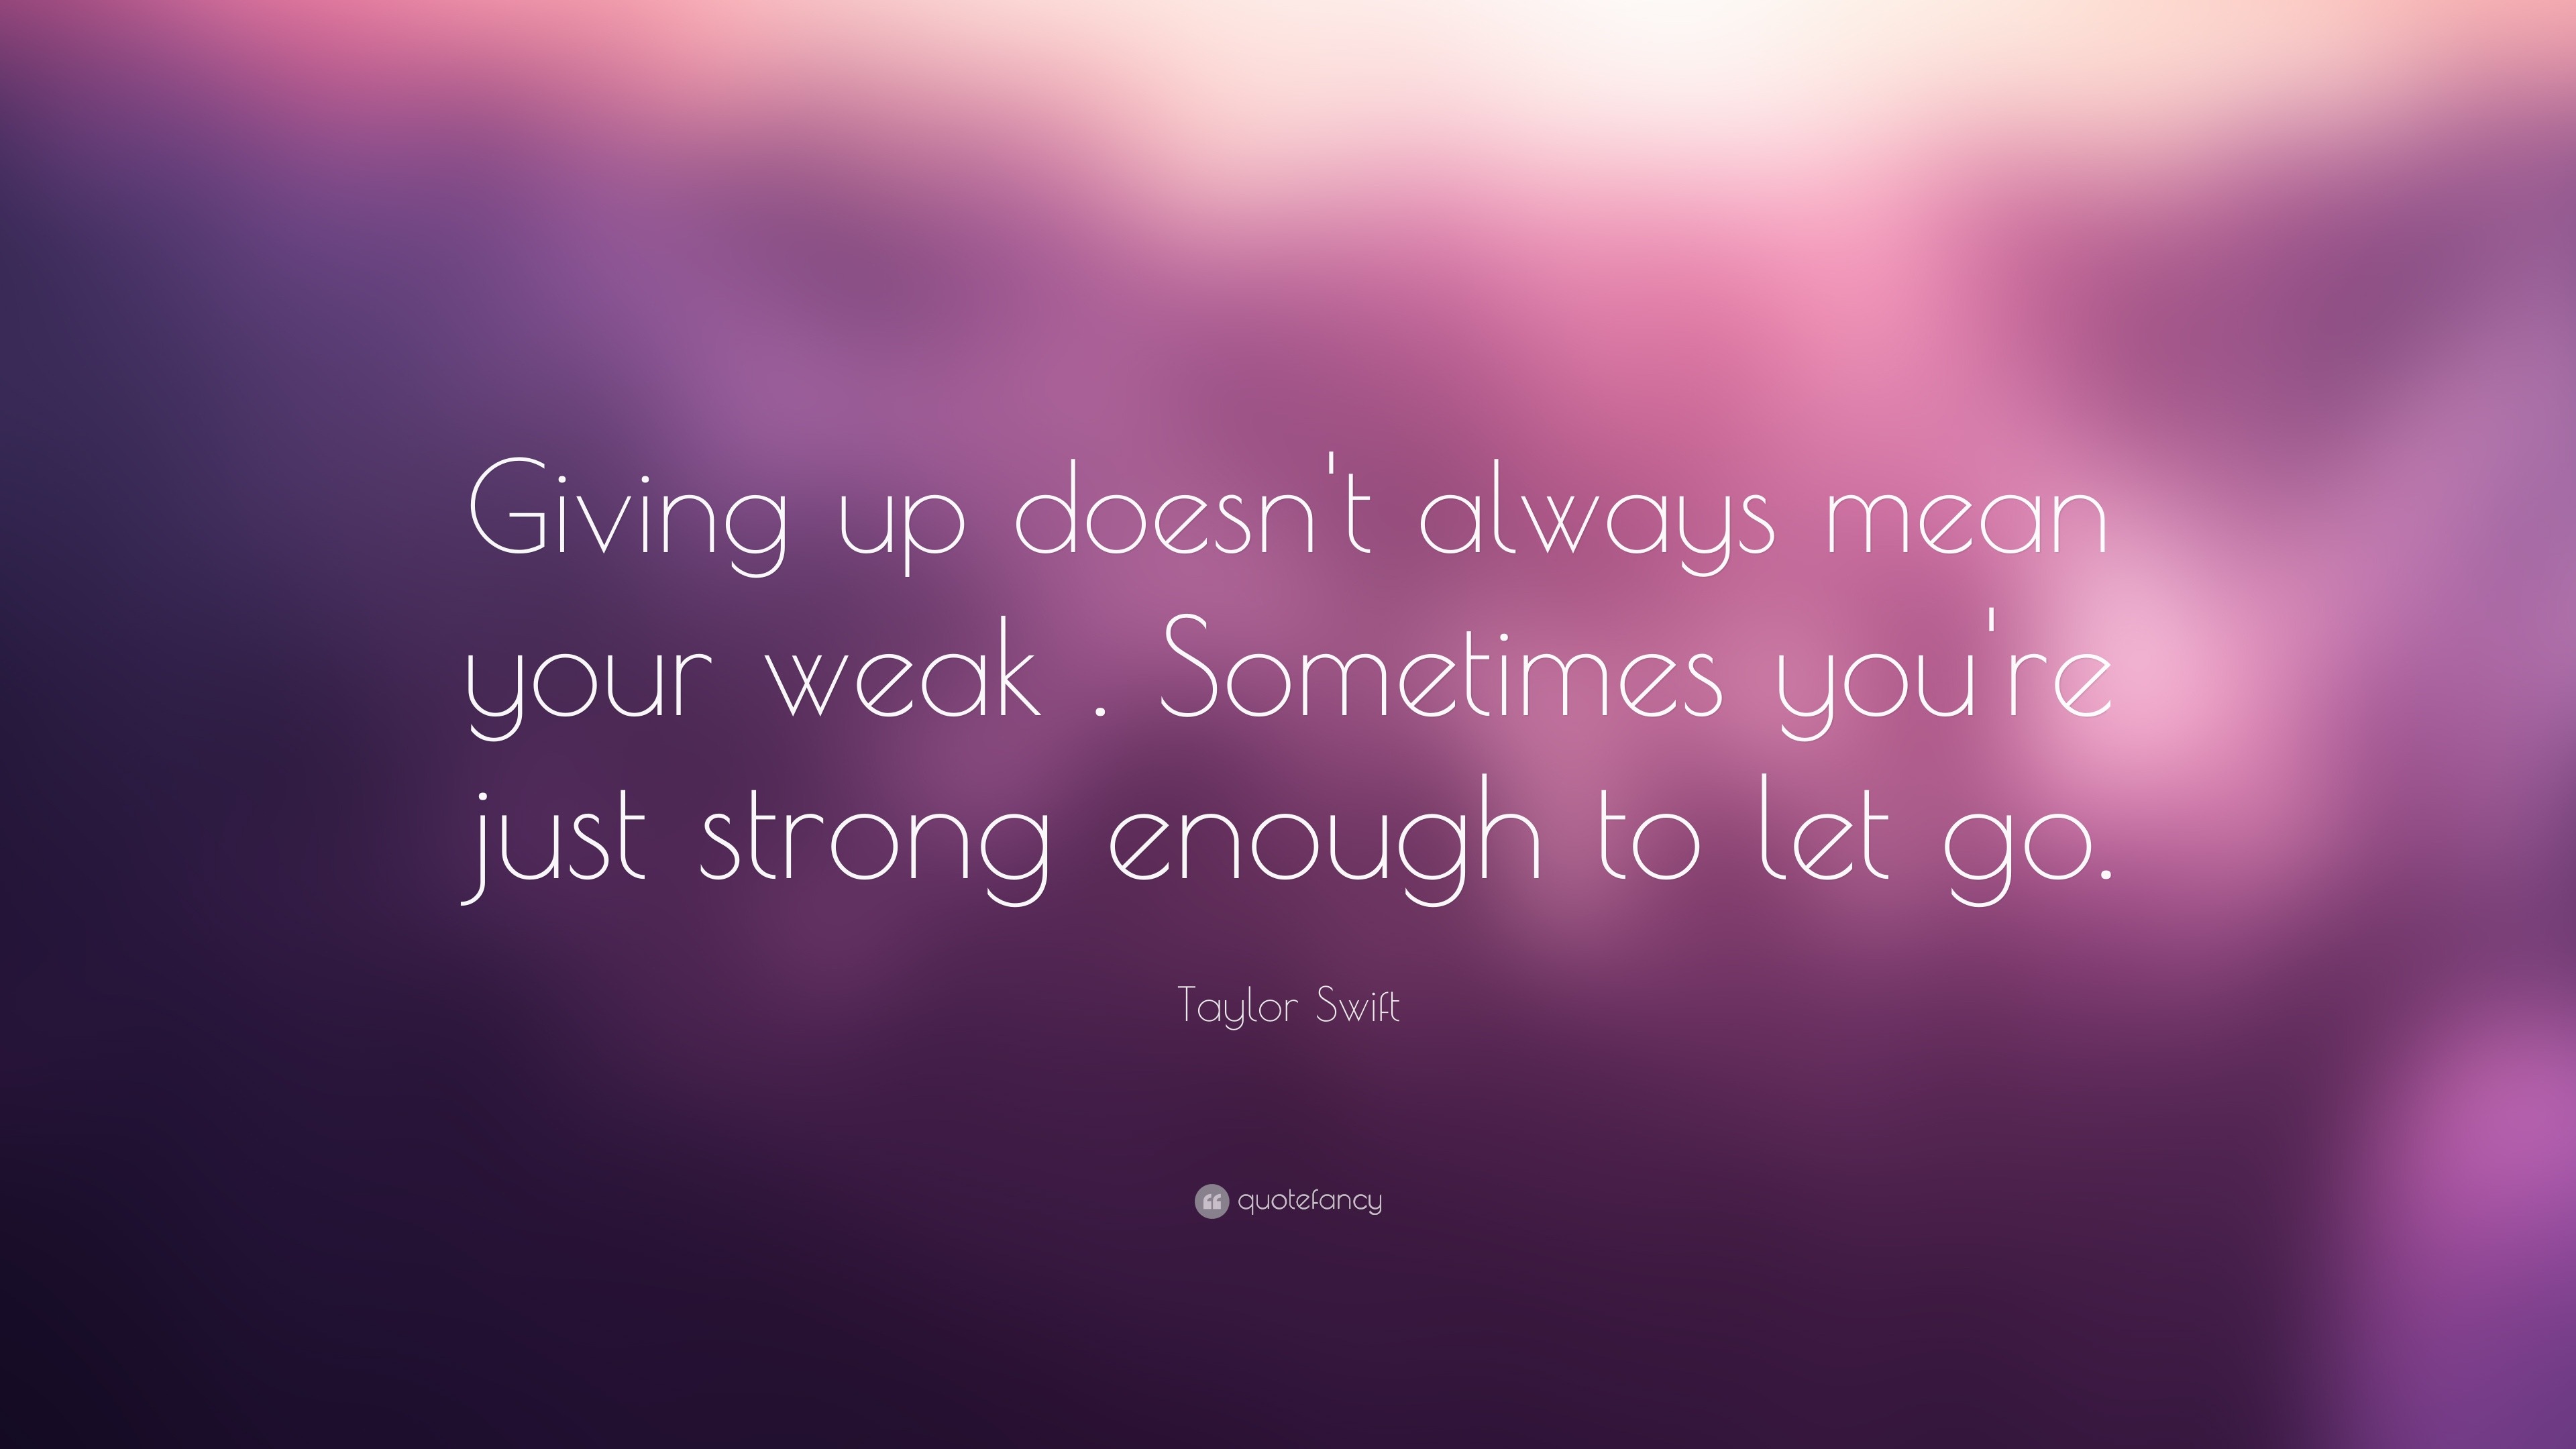 Taylor Swift Quote: “Giving up doesn't always mean your weak . Sometimes  you're just strong